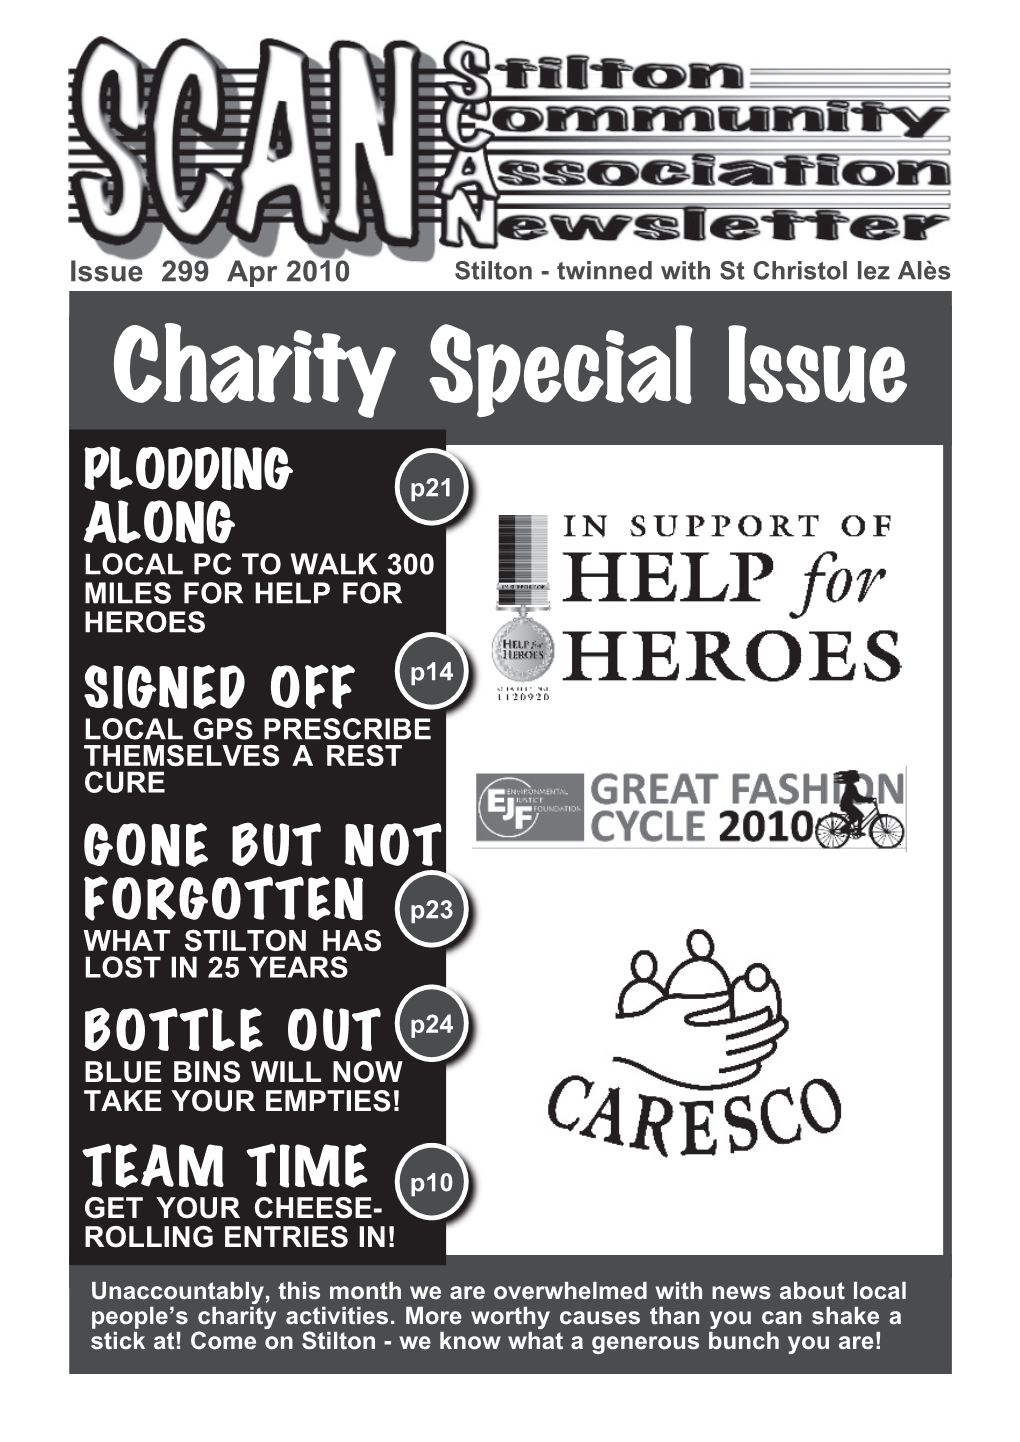 Charity Special Issue